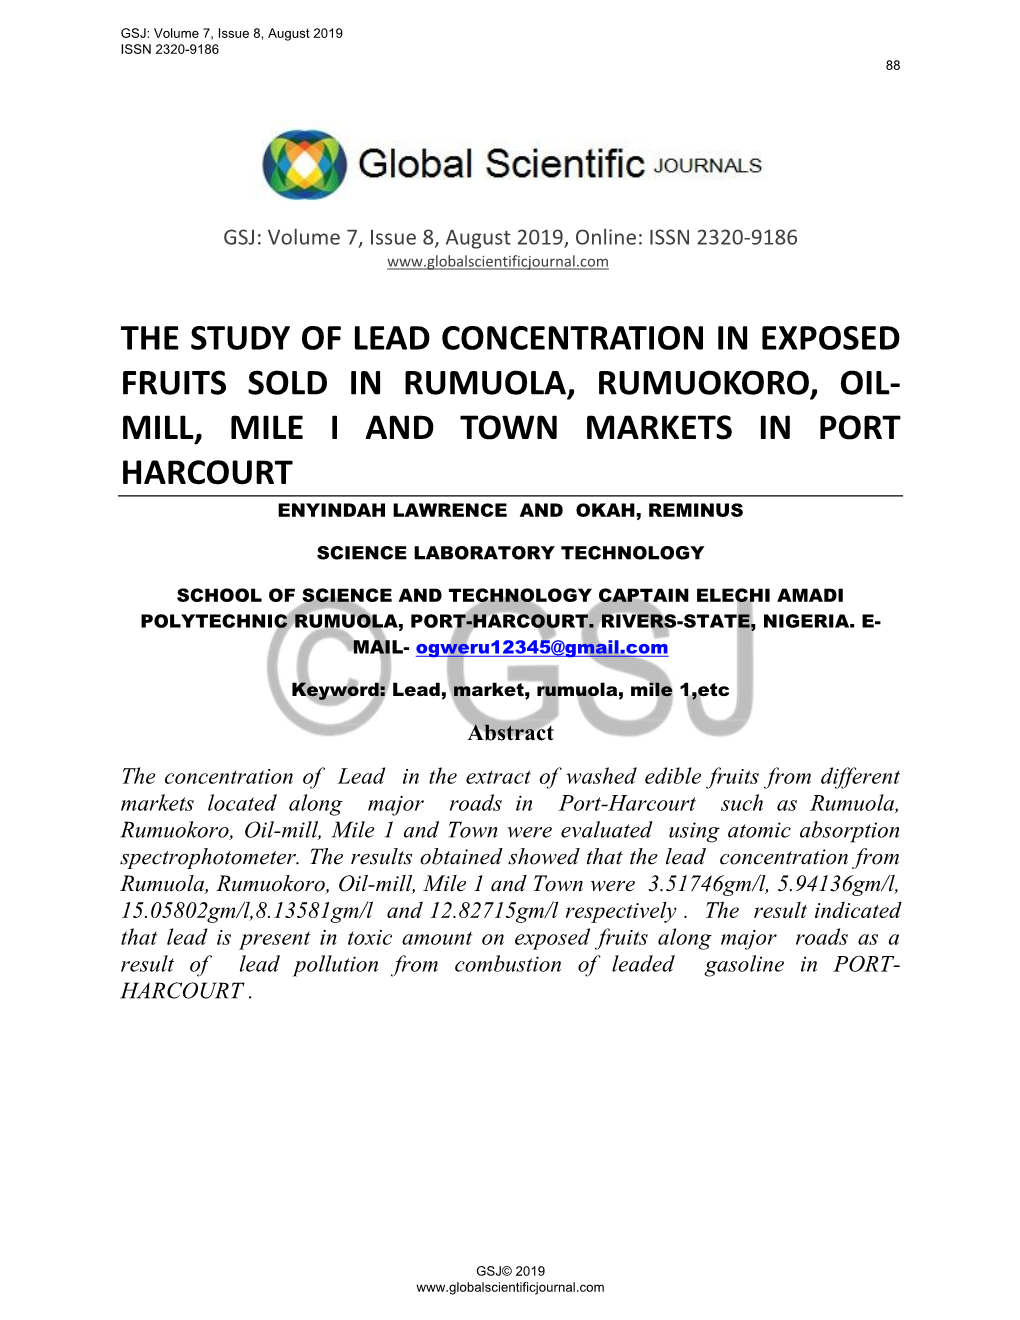 The Study of Lead Concentration in Exposed Fruits Sold in Rumuola, Rumuokoro, Oil- Mill, Mile I and Town Markets in Port Harcourt Enyindah Lawrence and Okah, Reminus